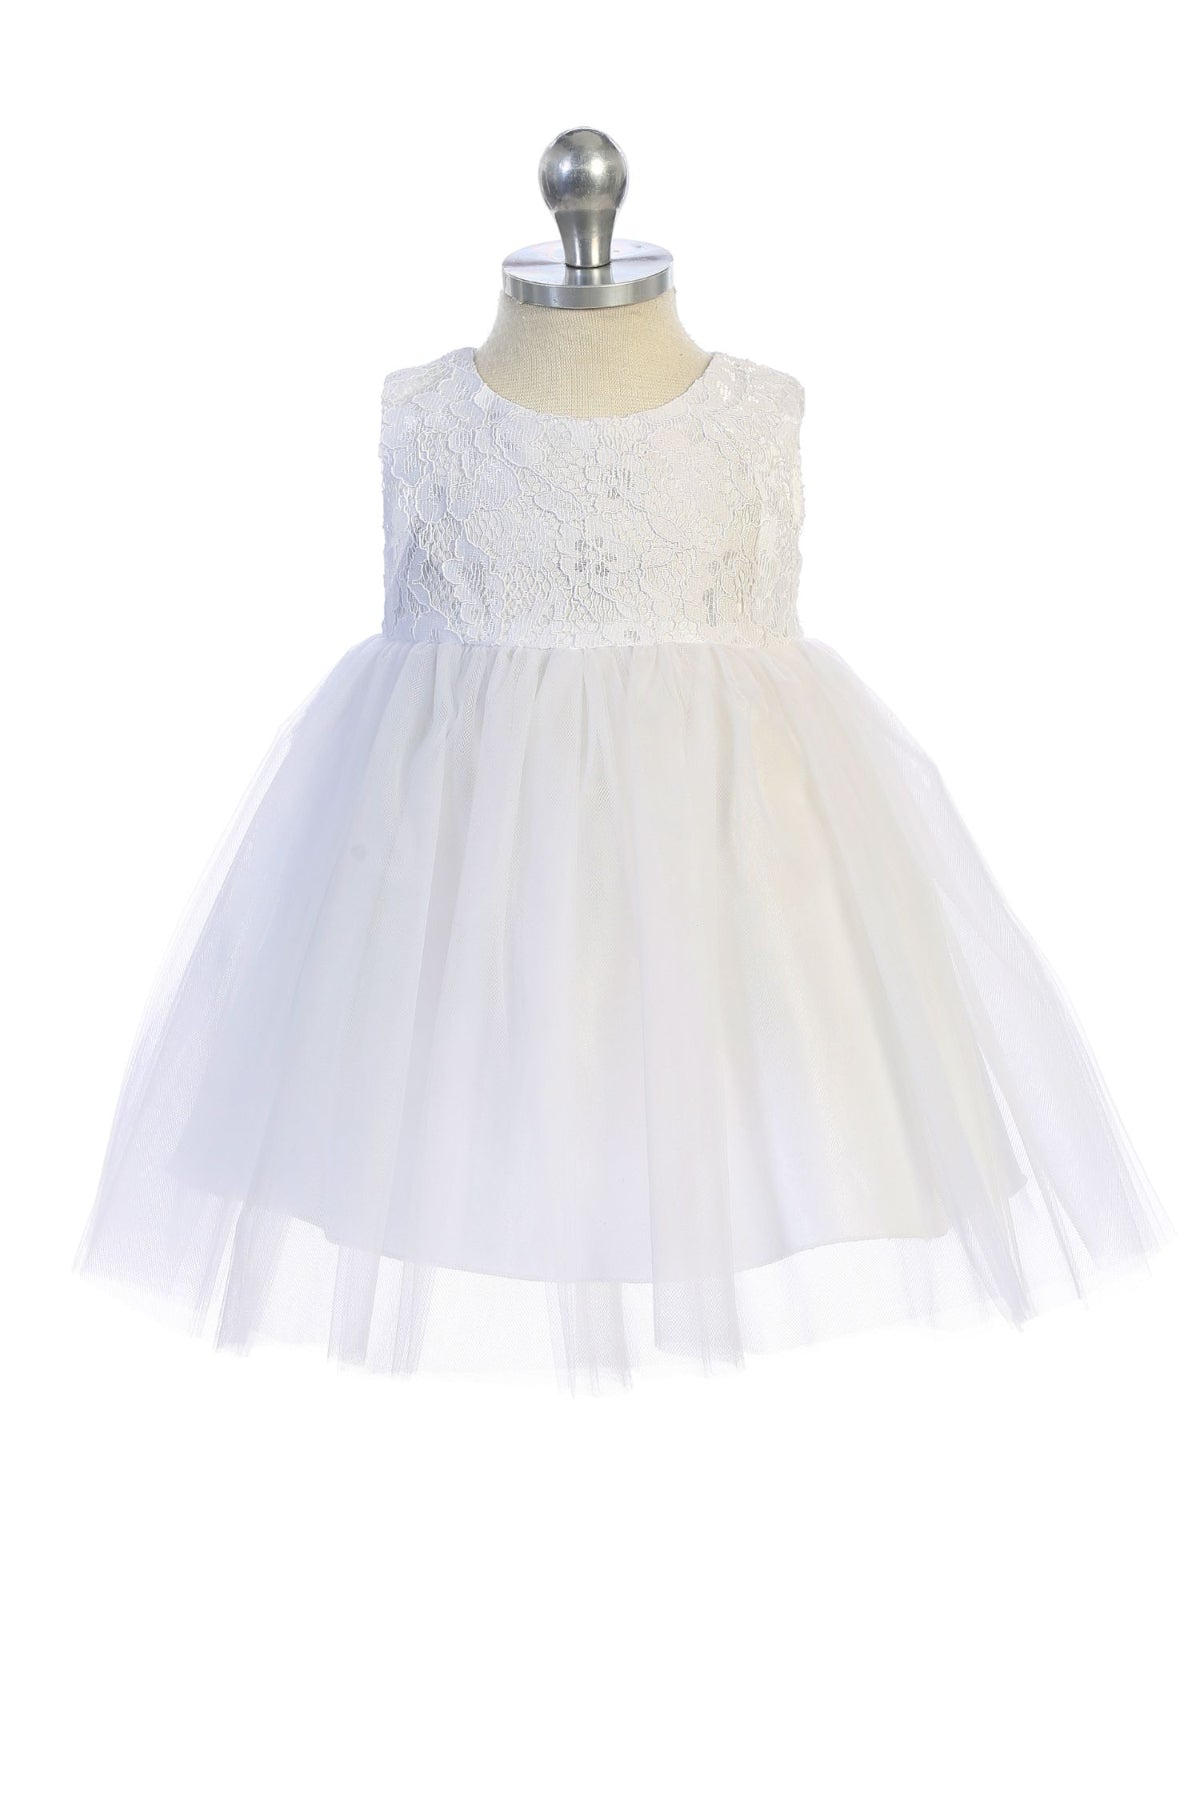 Lace Illusion Baby Dress with Mesh Pearl Trim